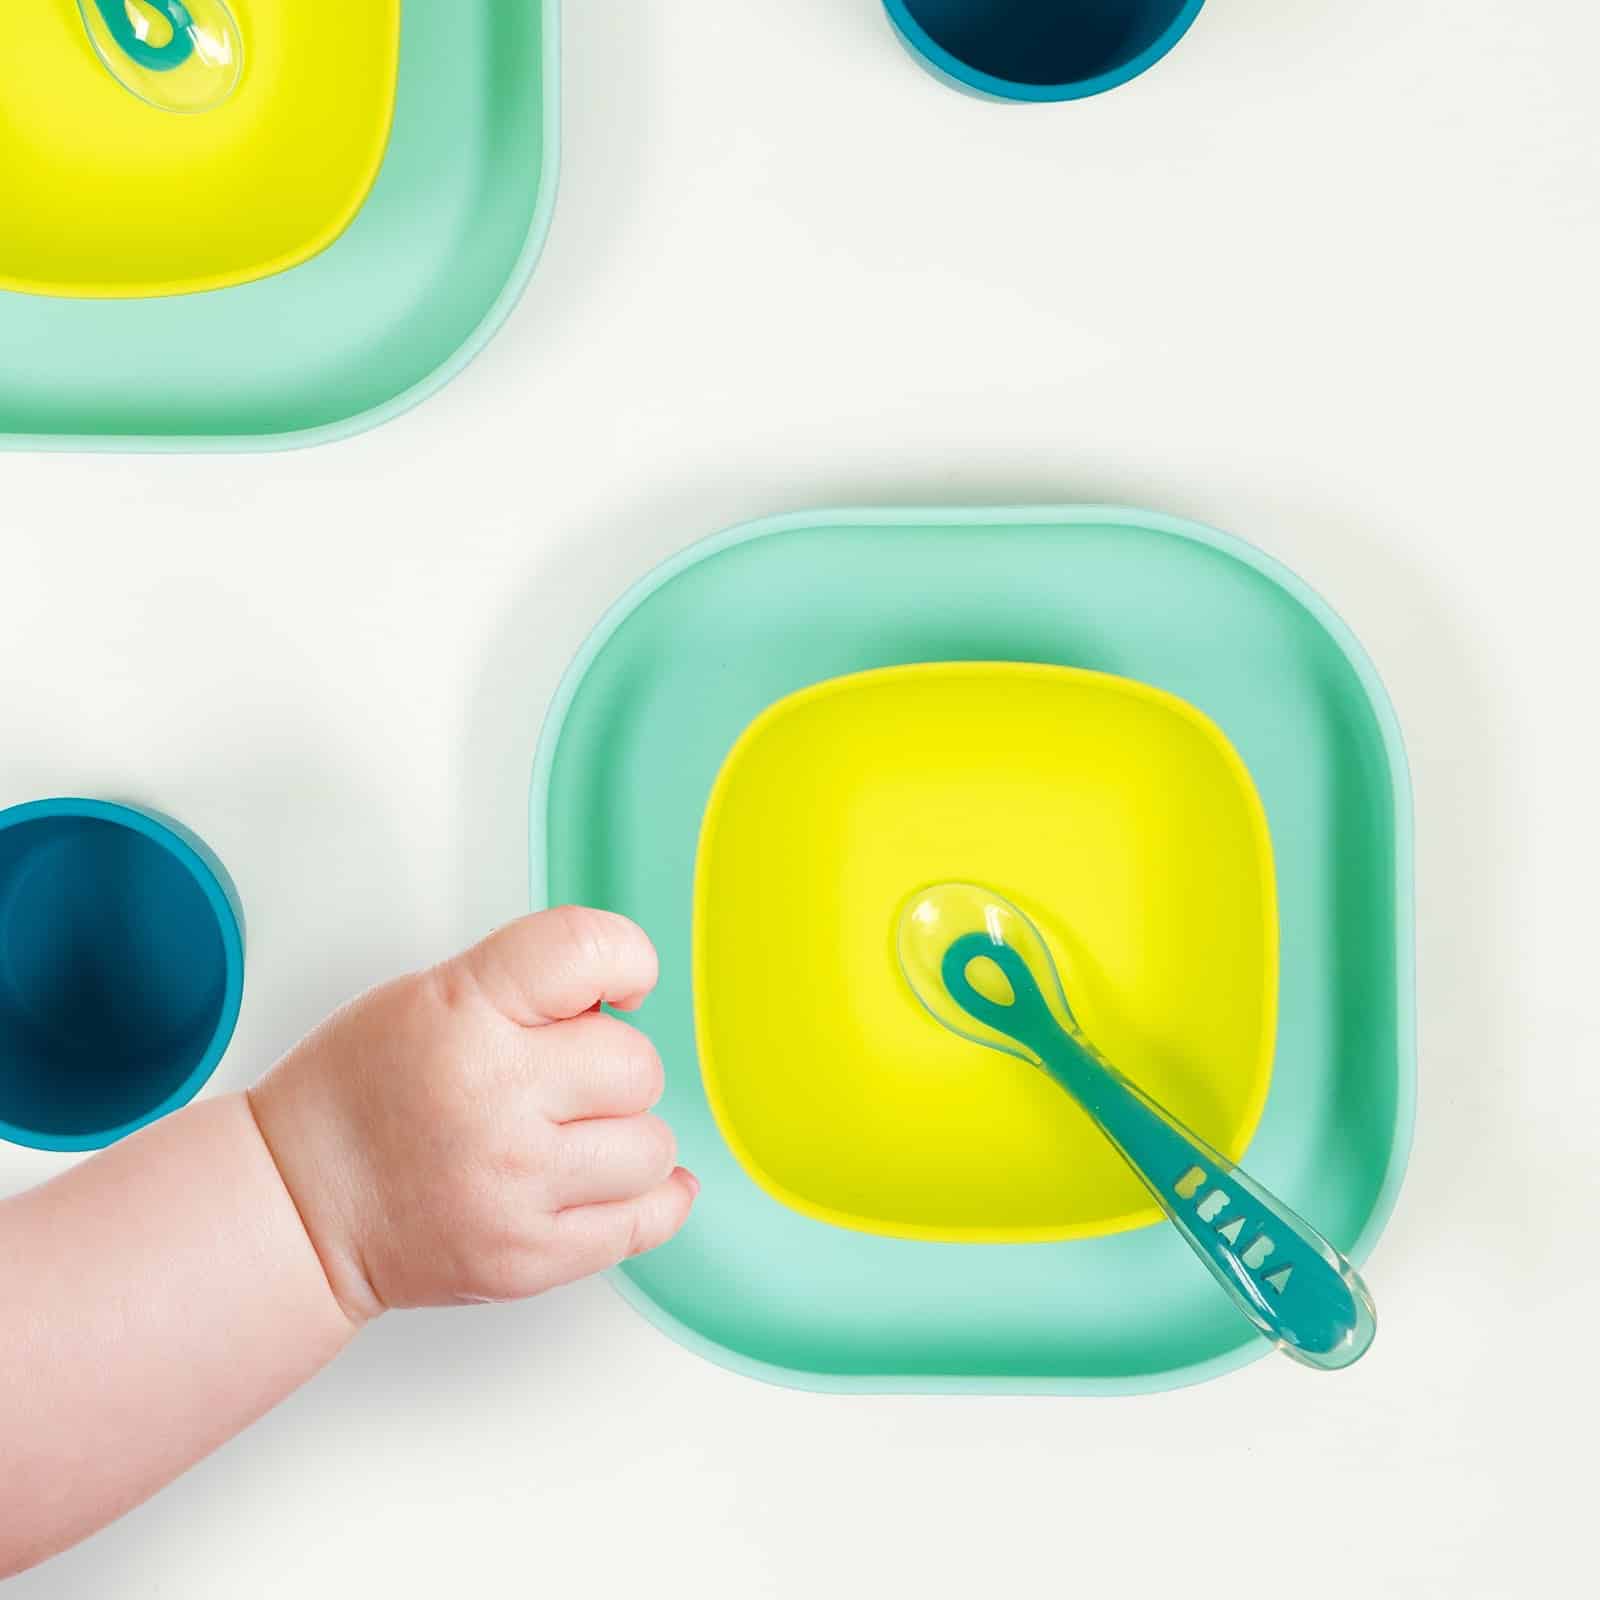 Baby hand reaching for silicone suciton meal set peacock